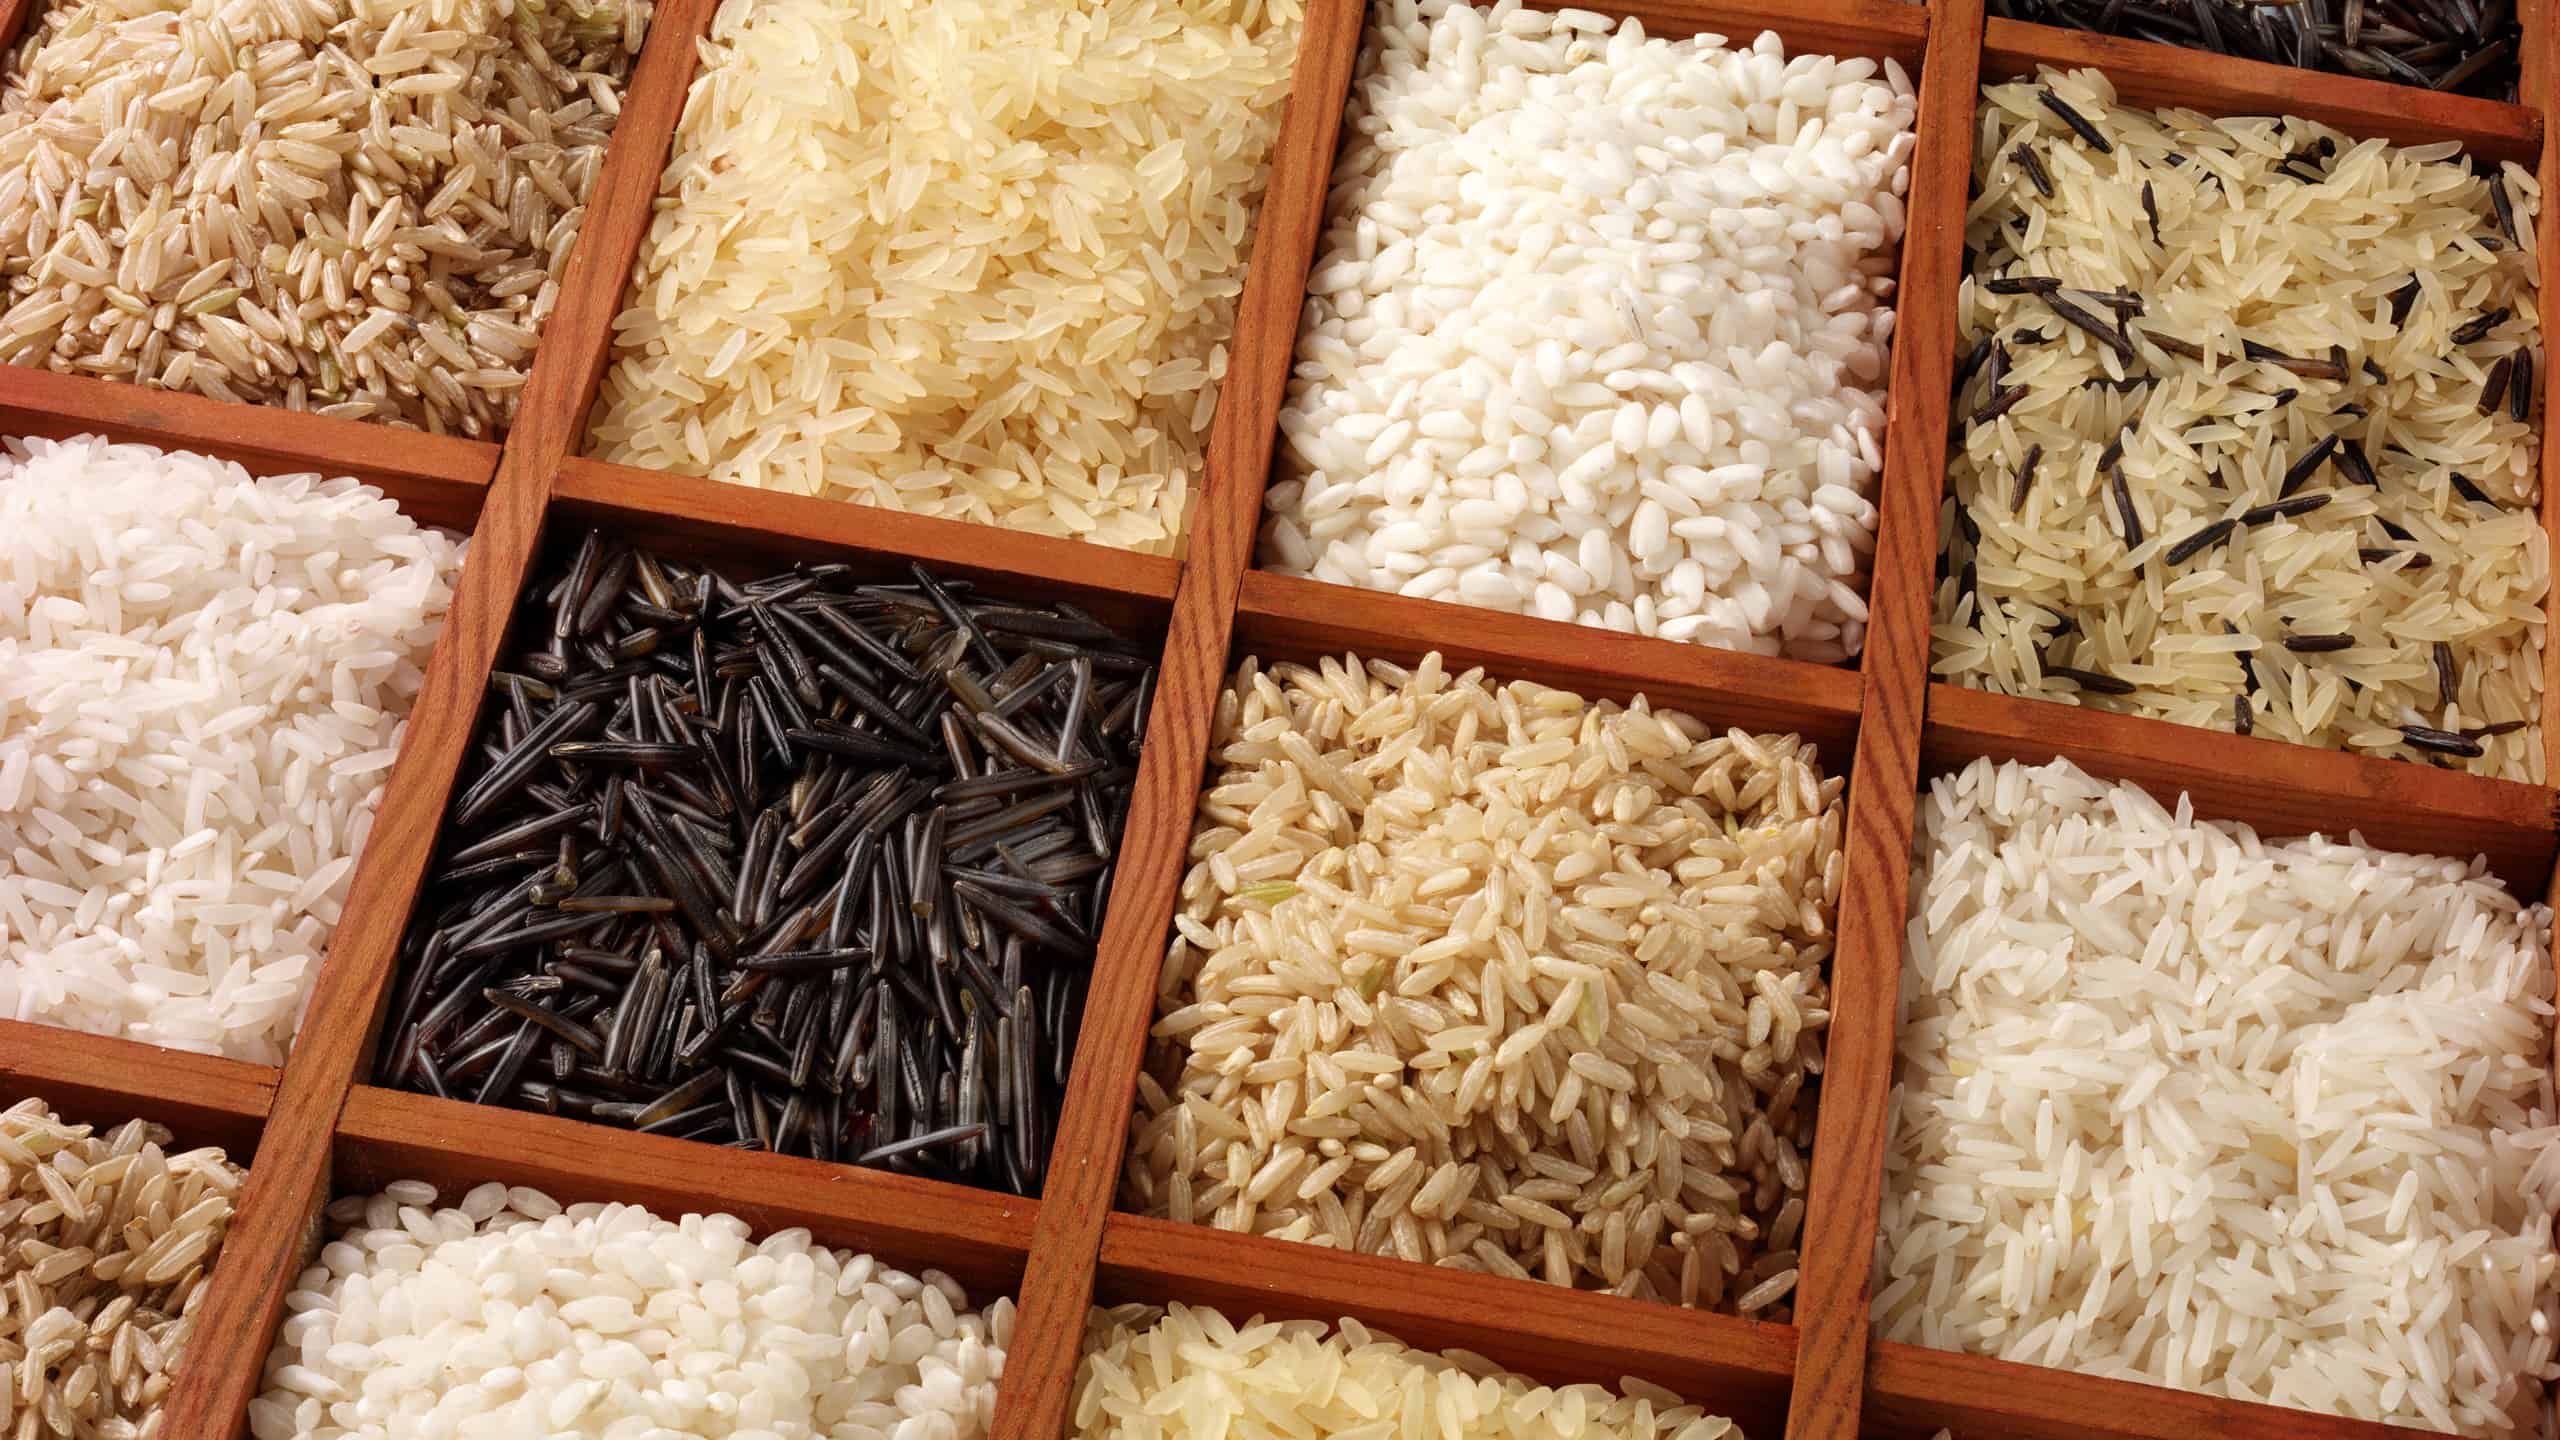 12 different square wooden boxes of different varieties of rice take up the frame.